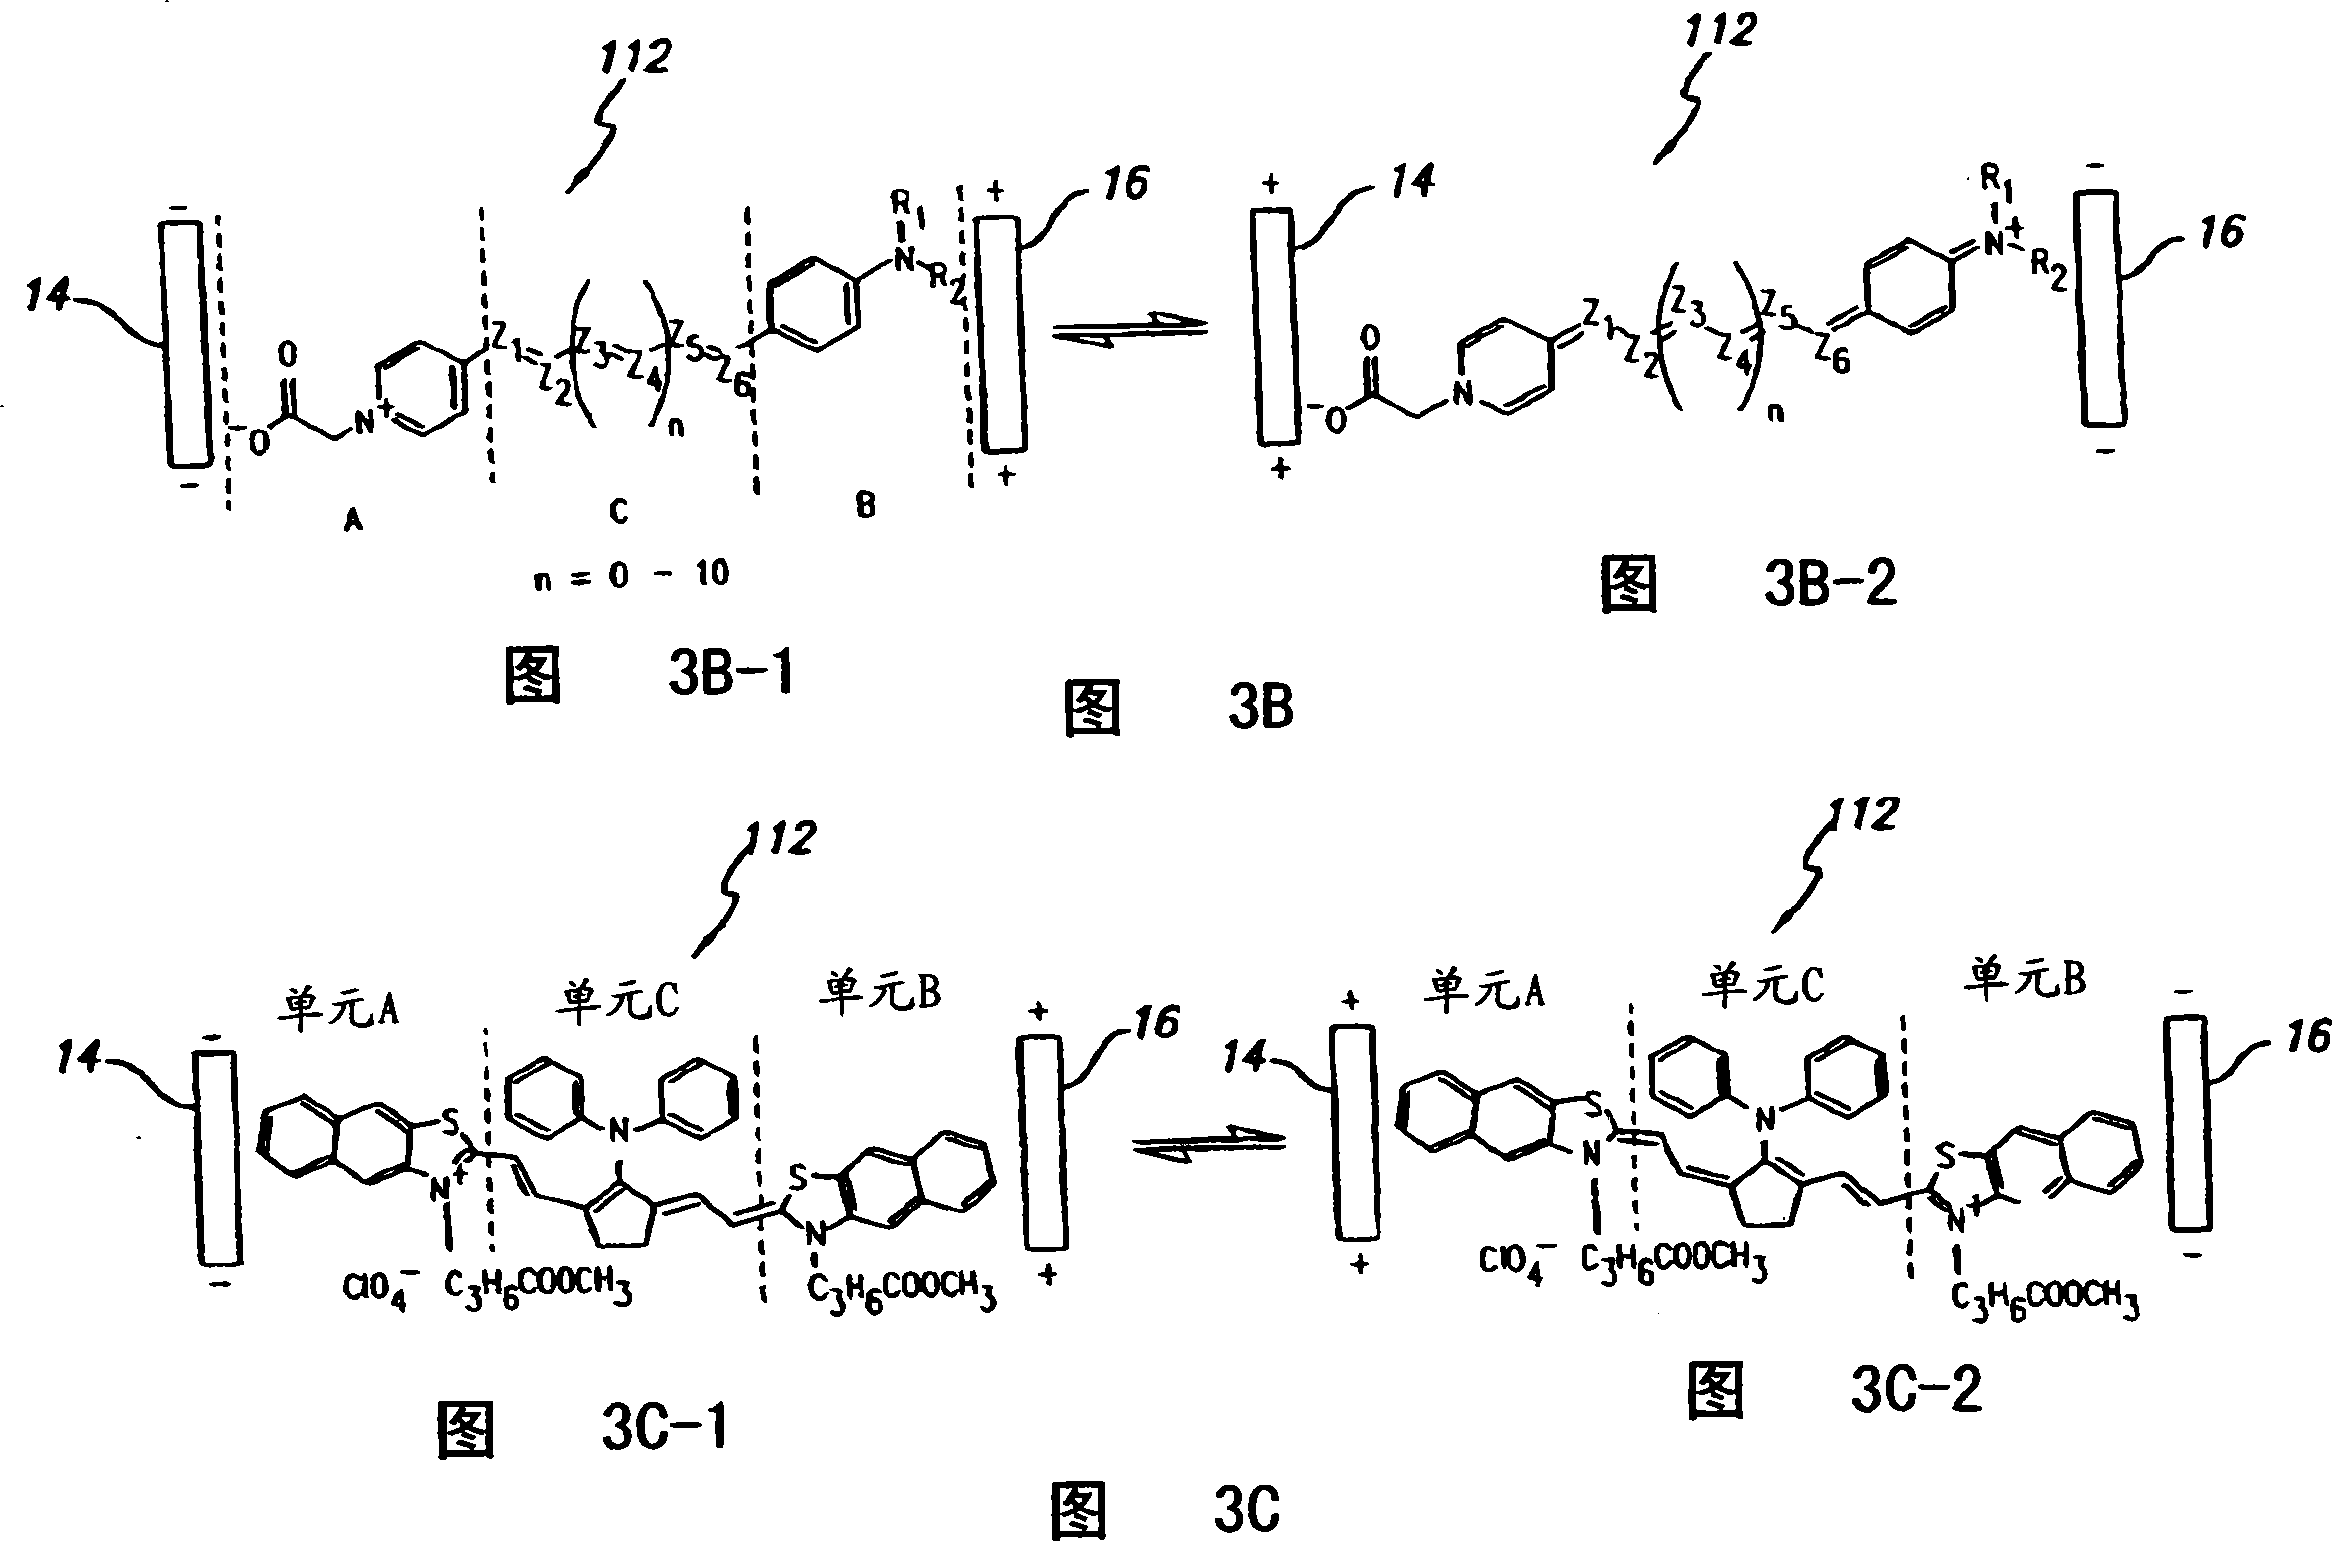 A composition of matter which results in electronic switching through intra- or inter- molecular charge transfer between molecules and electrodes induced by electricity